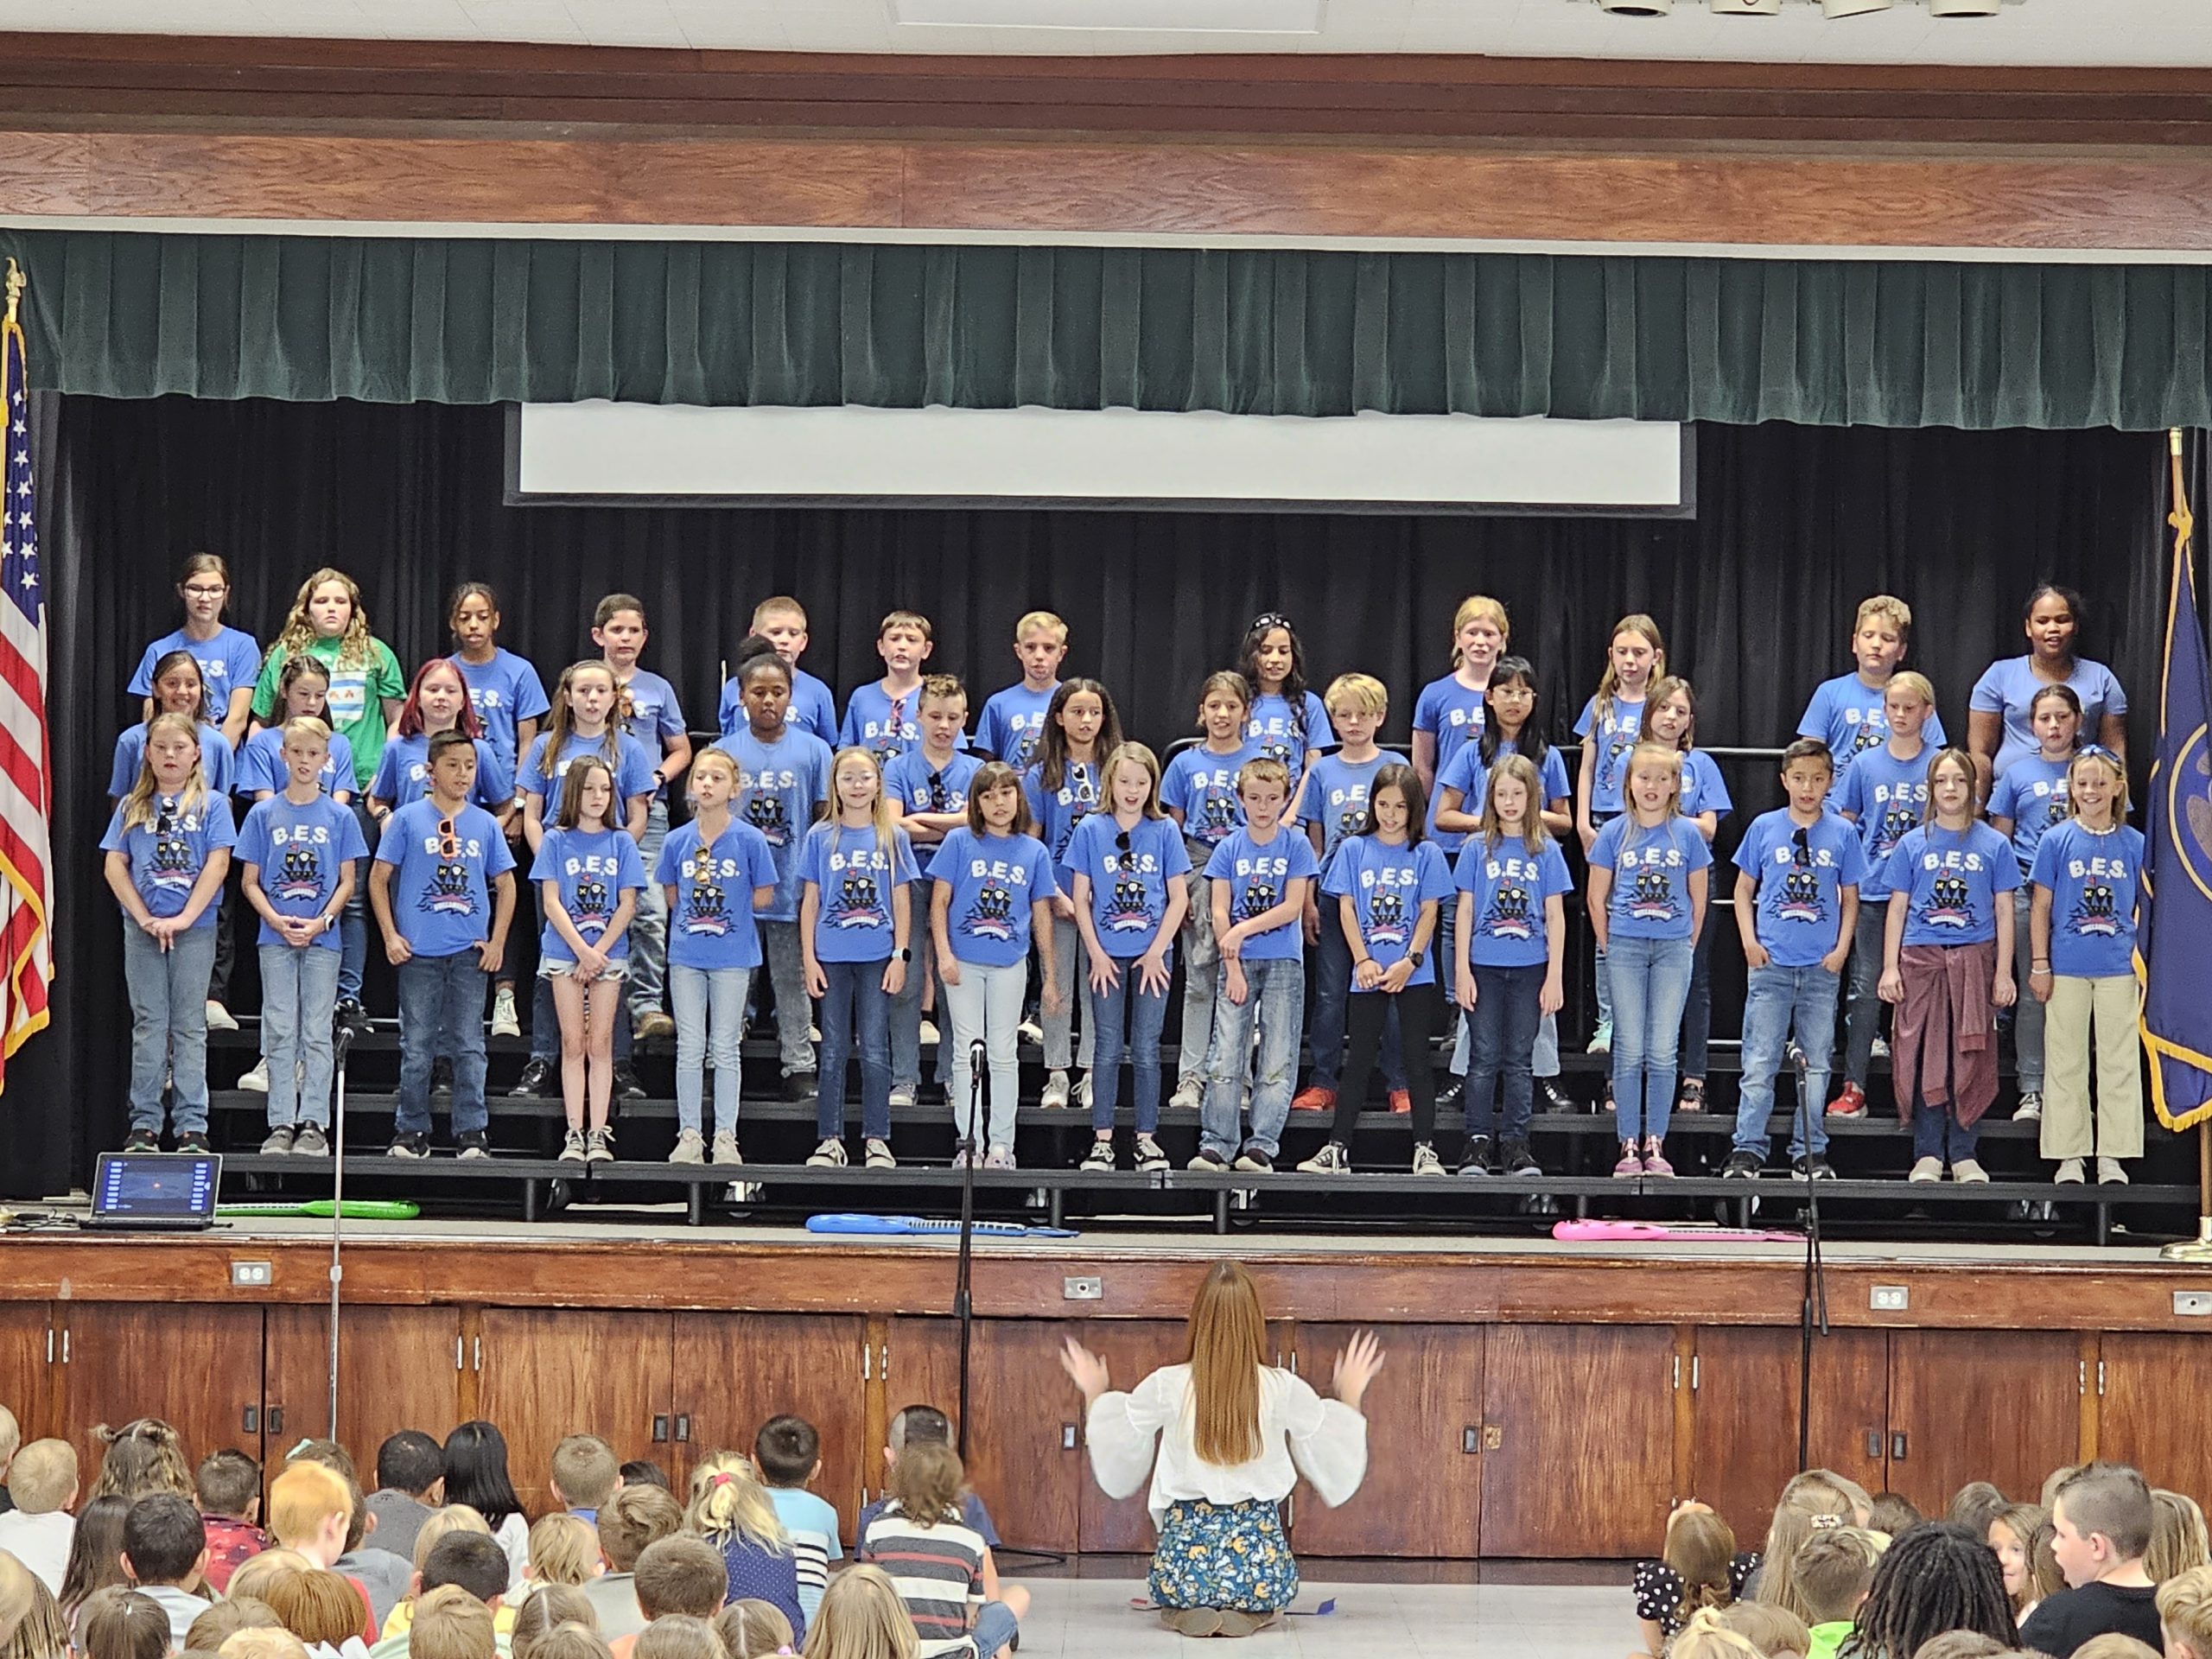 Choir performance on the stage with their choir shirts on. 